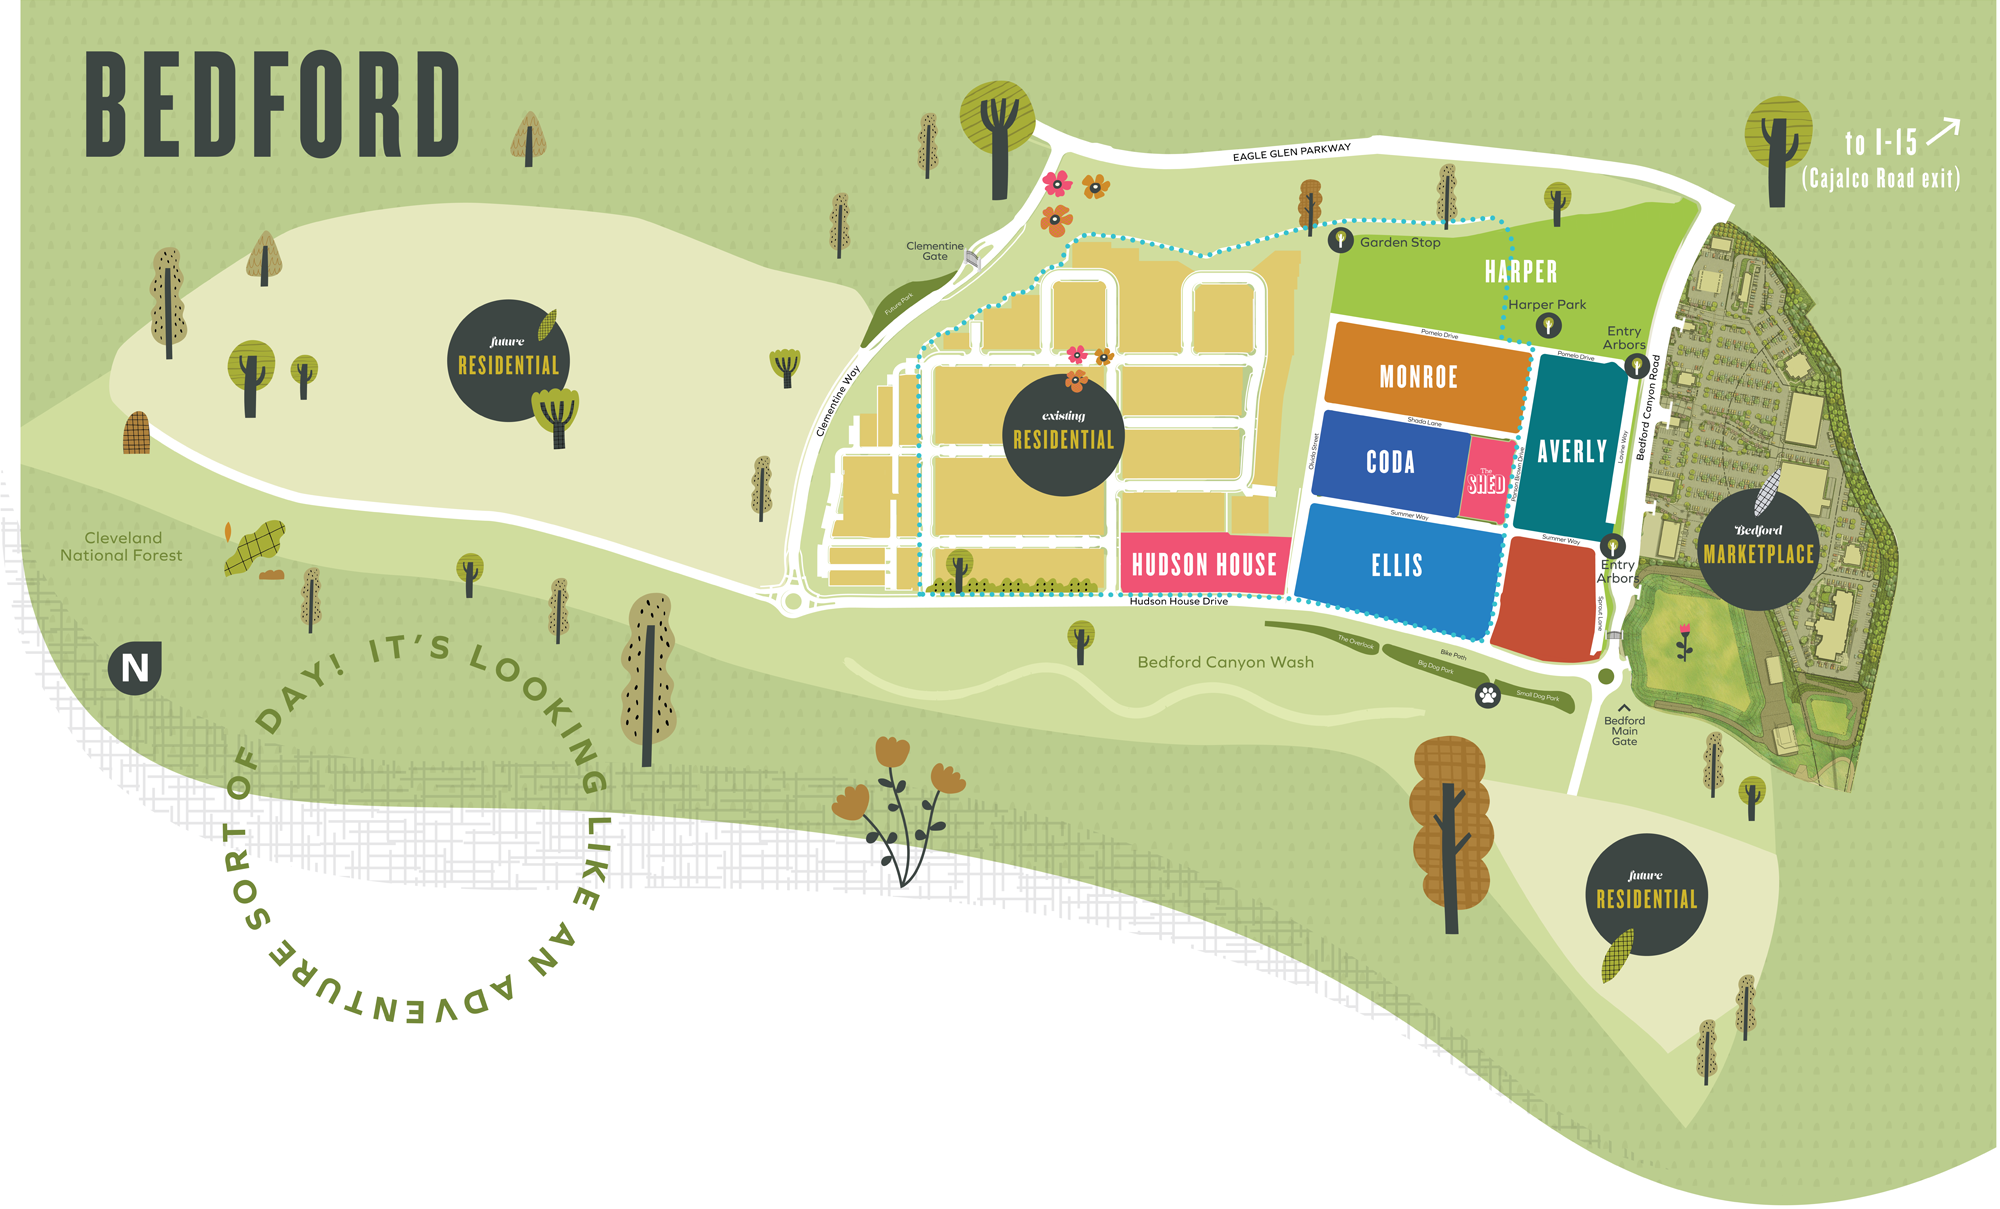 Bedford site map